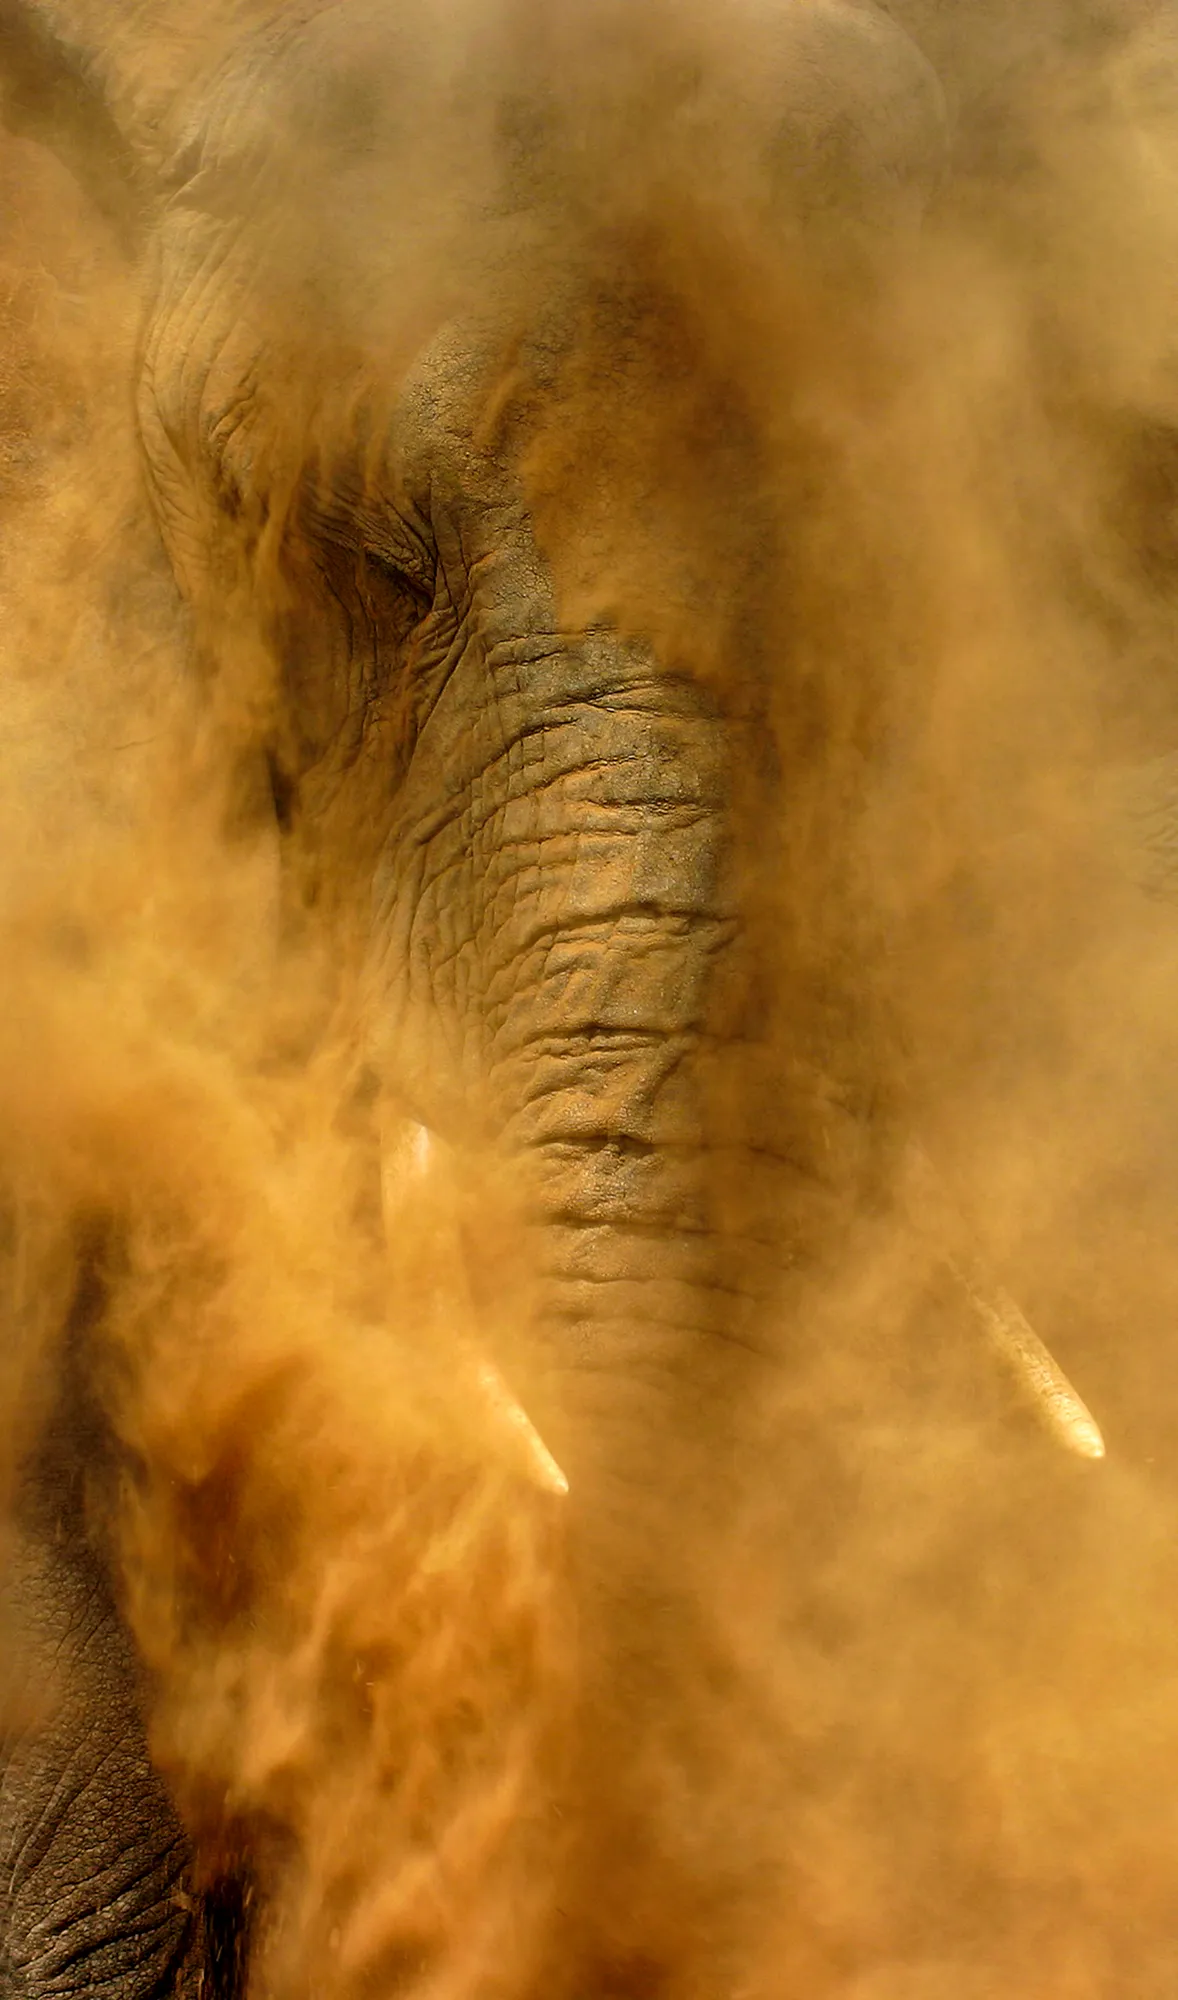 A close-up photograph of an elephant’s head and trunk, surrounded by swirling dust that is various shades of orange and brown in the light.